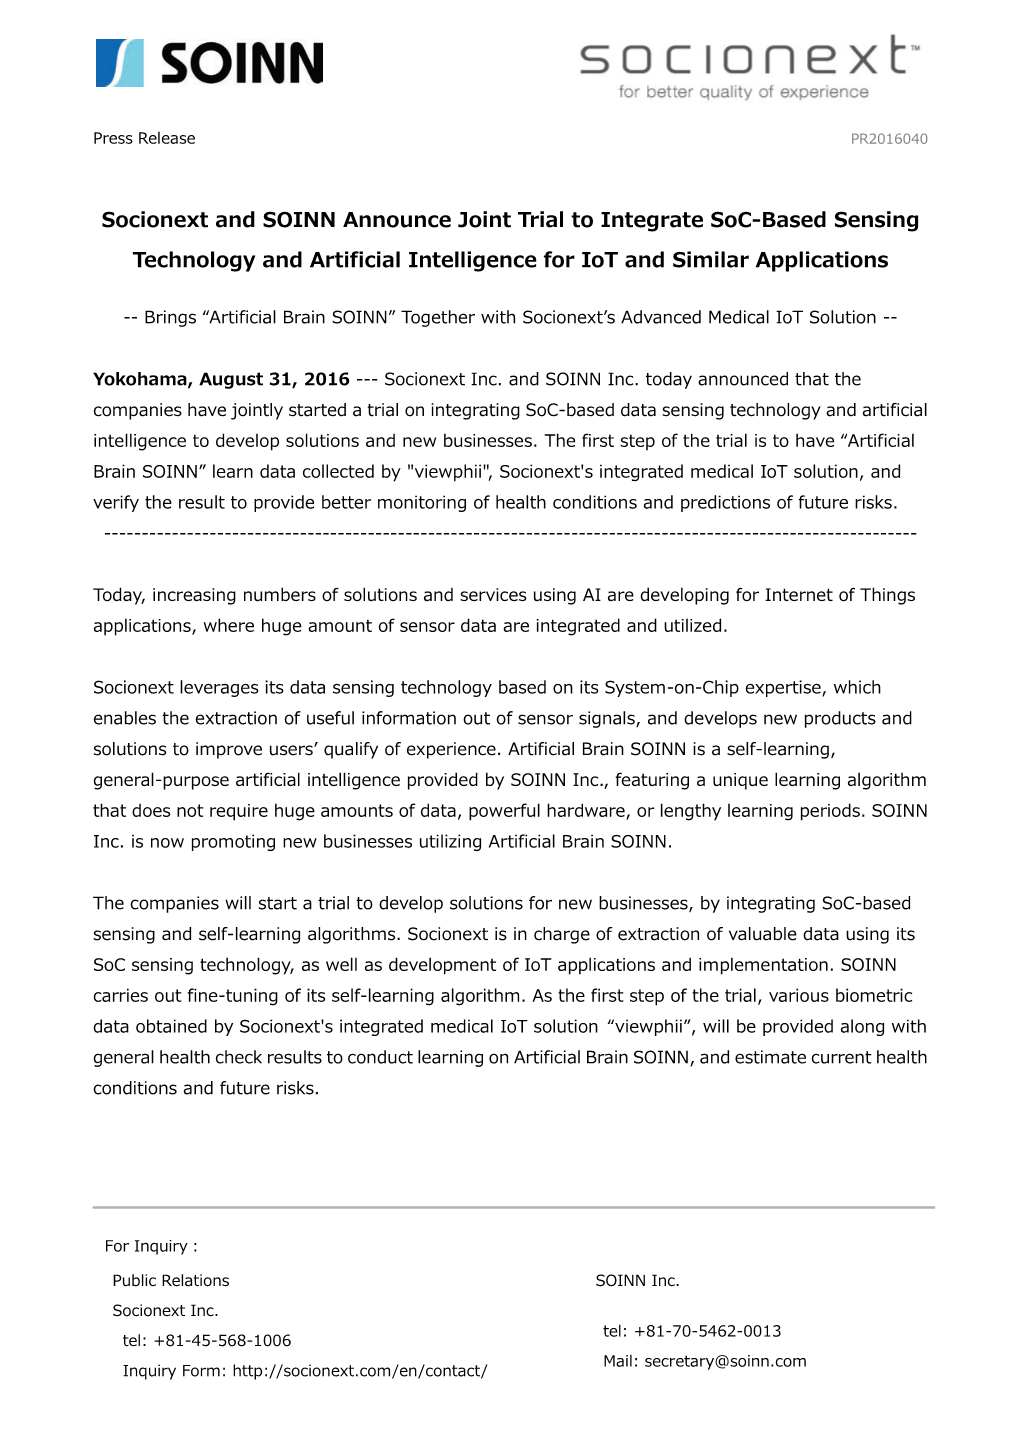 Socionext and SOINN Announce Joint Trial to Integrate Soc-Based Sensing Technology and Artificial Intelligence for Iot and Similar Applications